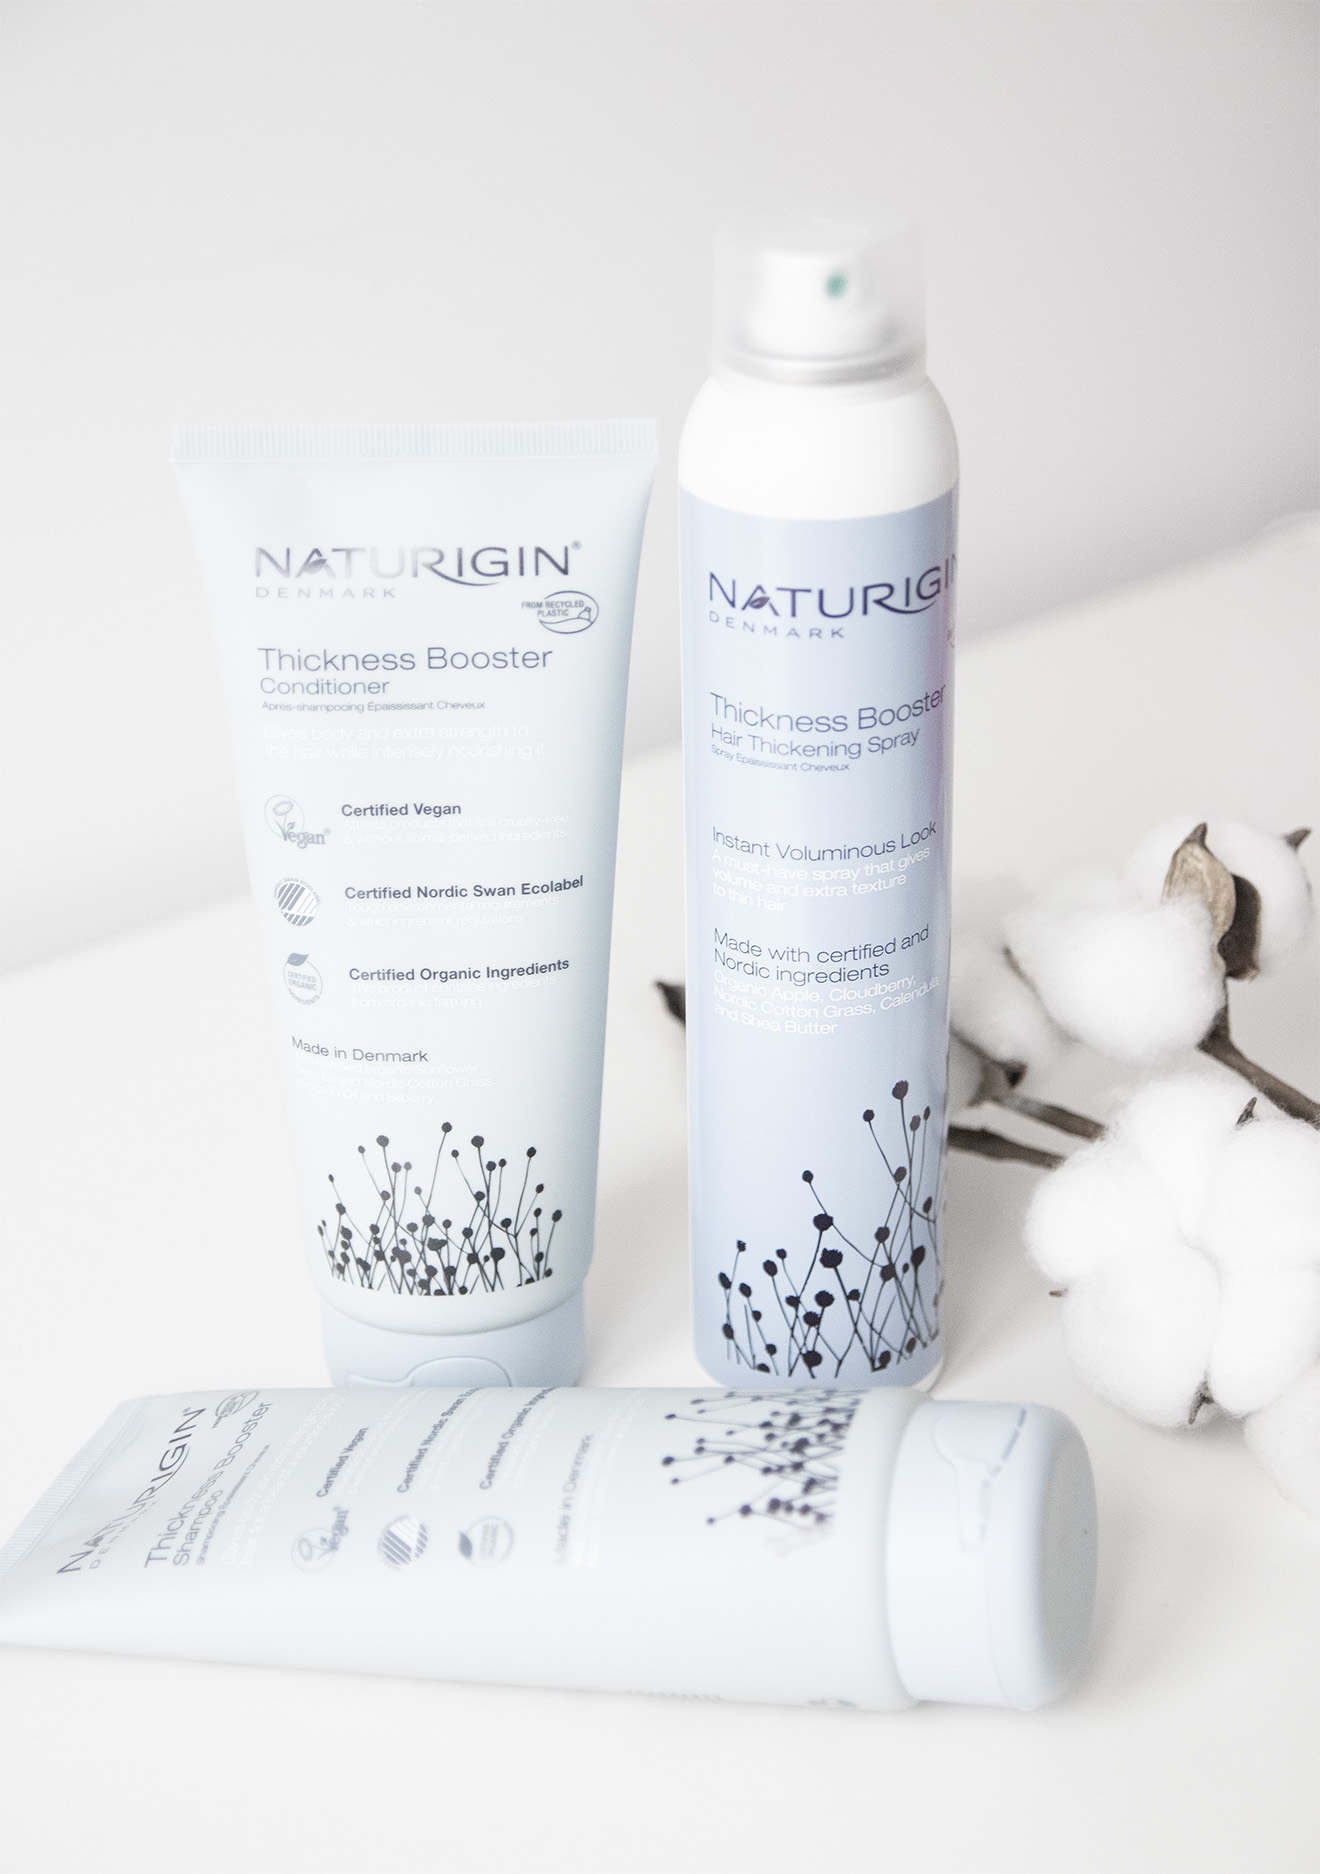 Naturigin Thickness Booster Haircare